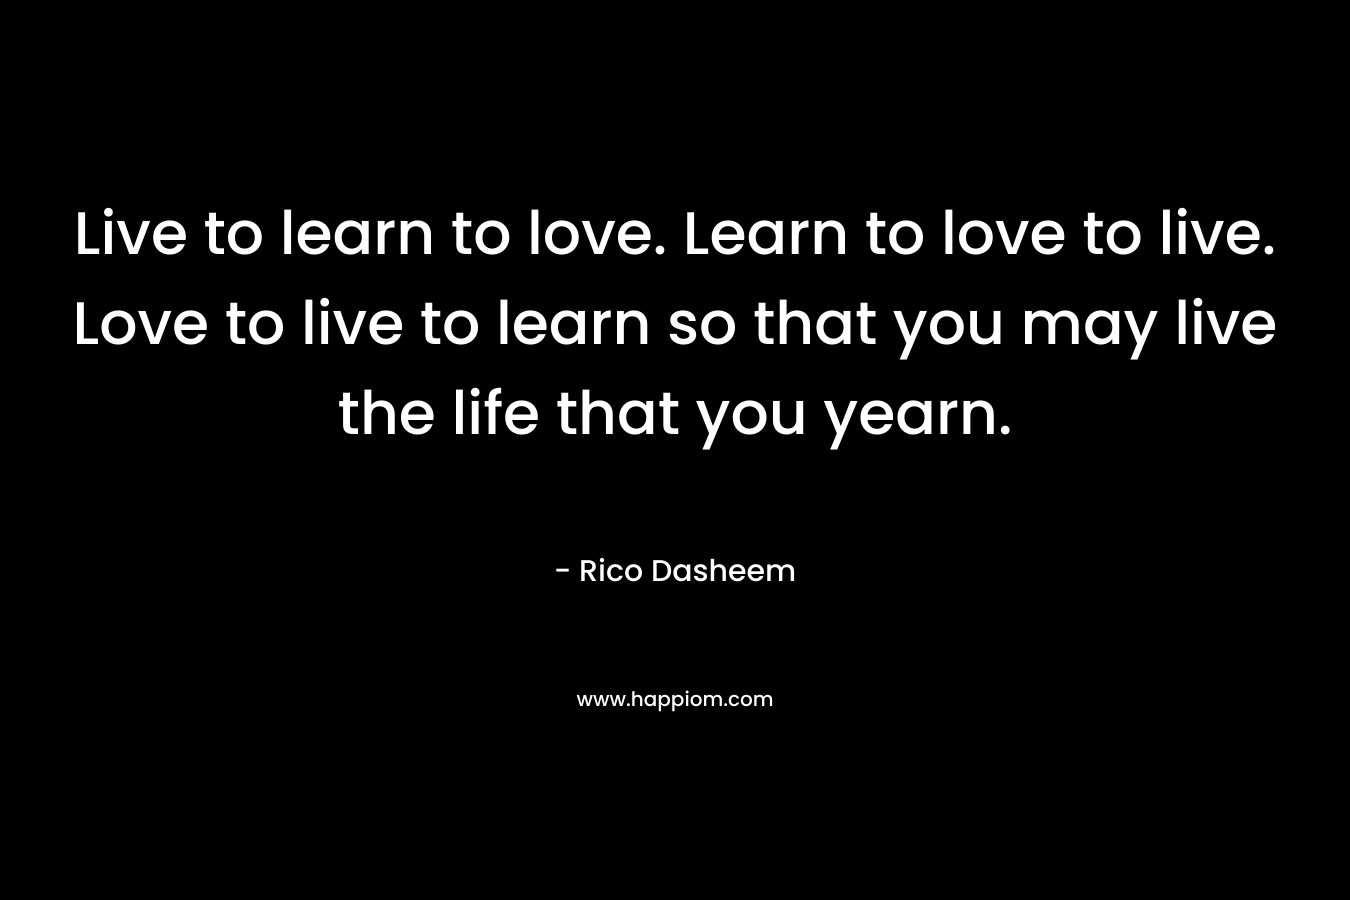 Live to learn to love. Learn to love to live. Love to live to learn so that you may live the life that you yearn.